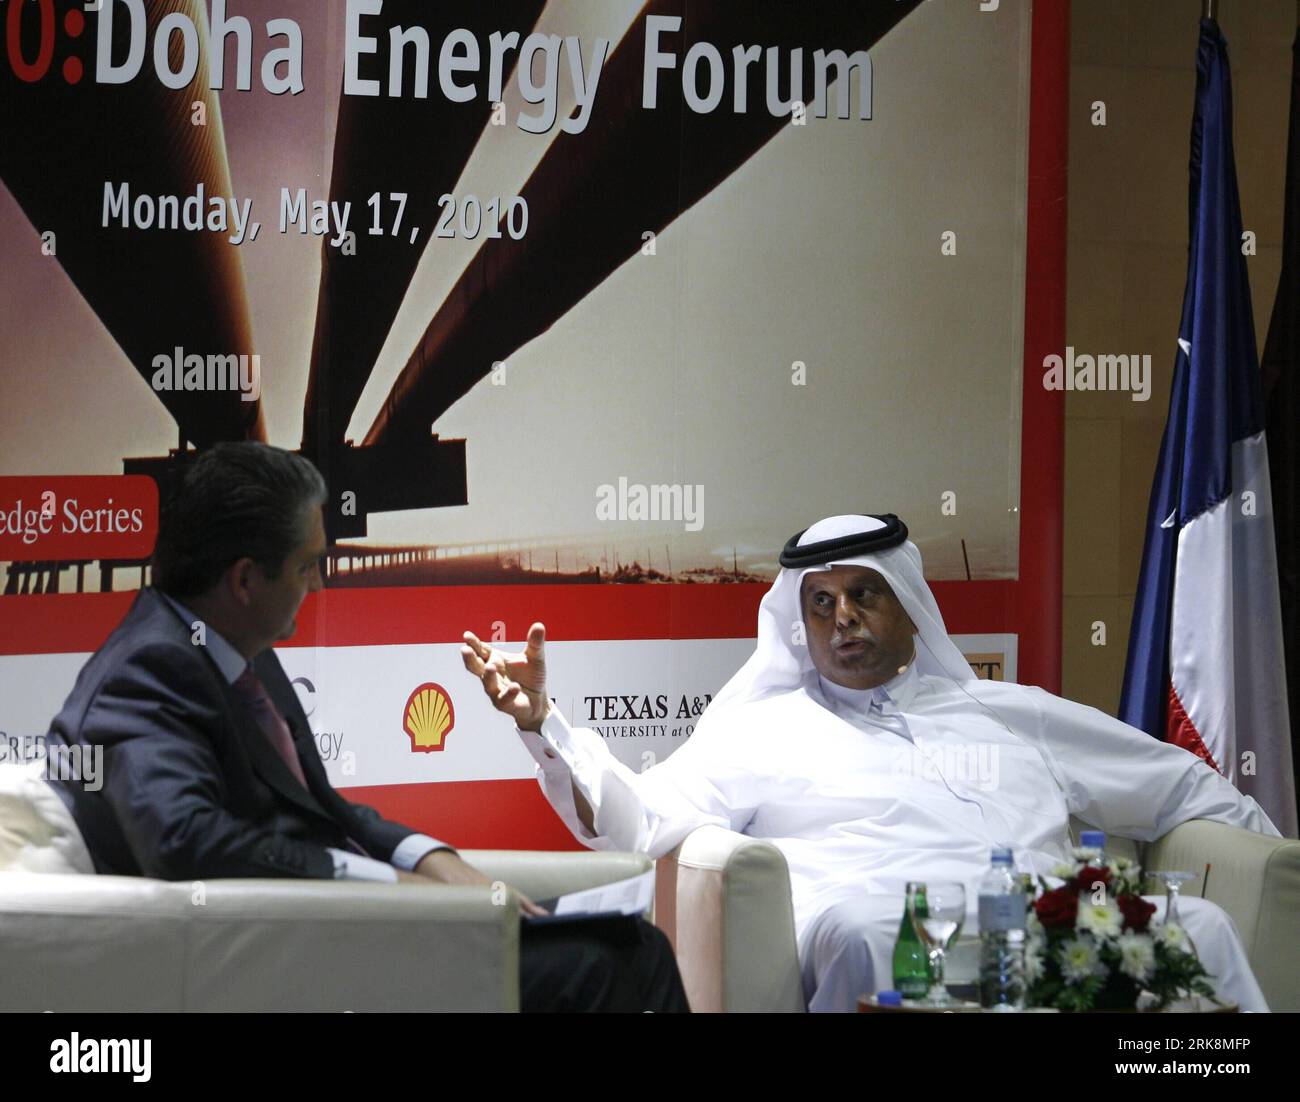 Bildnummer: 54055993  Datum: 17.05.2010  Copyright: imago/Xinhua (100517) -- DOHA, May 17, 2010 (Xinhua) -- Qatari Minister of Energy and Industry Abdullah bin Hamad Al-Attiyah speaks during the second Doha Energy Forum in Doha, capital of Qatar, May 17, 2010. Al-Attiyah Monday said the fair prices for crude oil should stay between 70 and 80 U.S. dollars per barrel to satisfy both producers and consumers.(Xinhua/Maneesh Bakshi) (gxr) (2)QATAR-DOHA-ENERGY MINISTER-CRUDE OIL-PRICE PUBLICATIONxNOTxINxCHN People Politik Wirtschaft kbdig xcb 2010 quer     Bildnummer 54055993 Date 17 05 2010 Copyrig Stock Photo